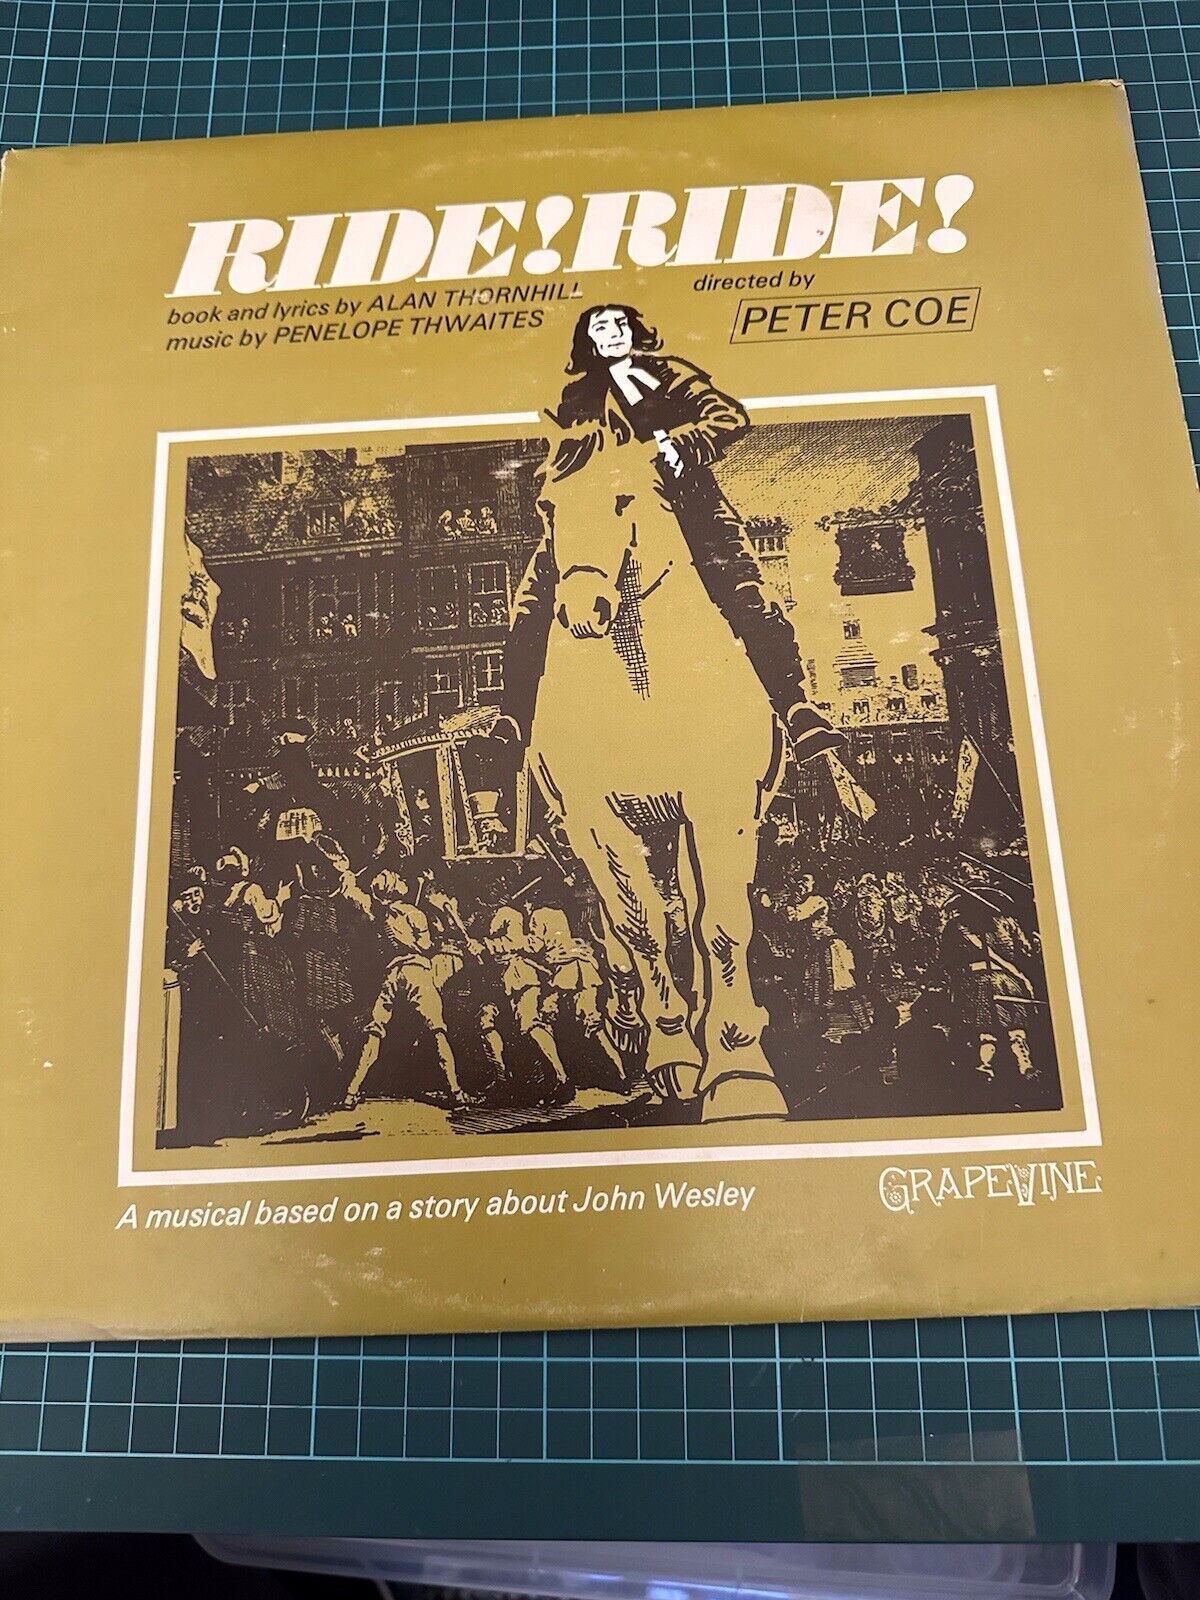 Ride! Ride! LP. Musical Based On The Life Of John Wesley. Grapevine Records